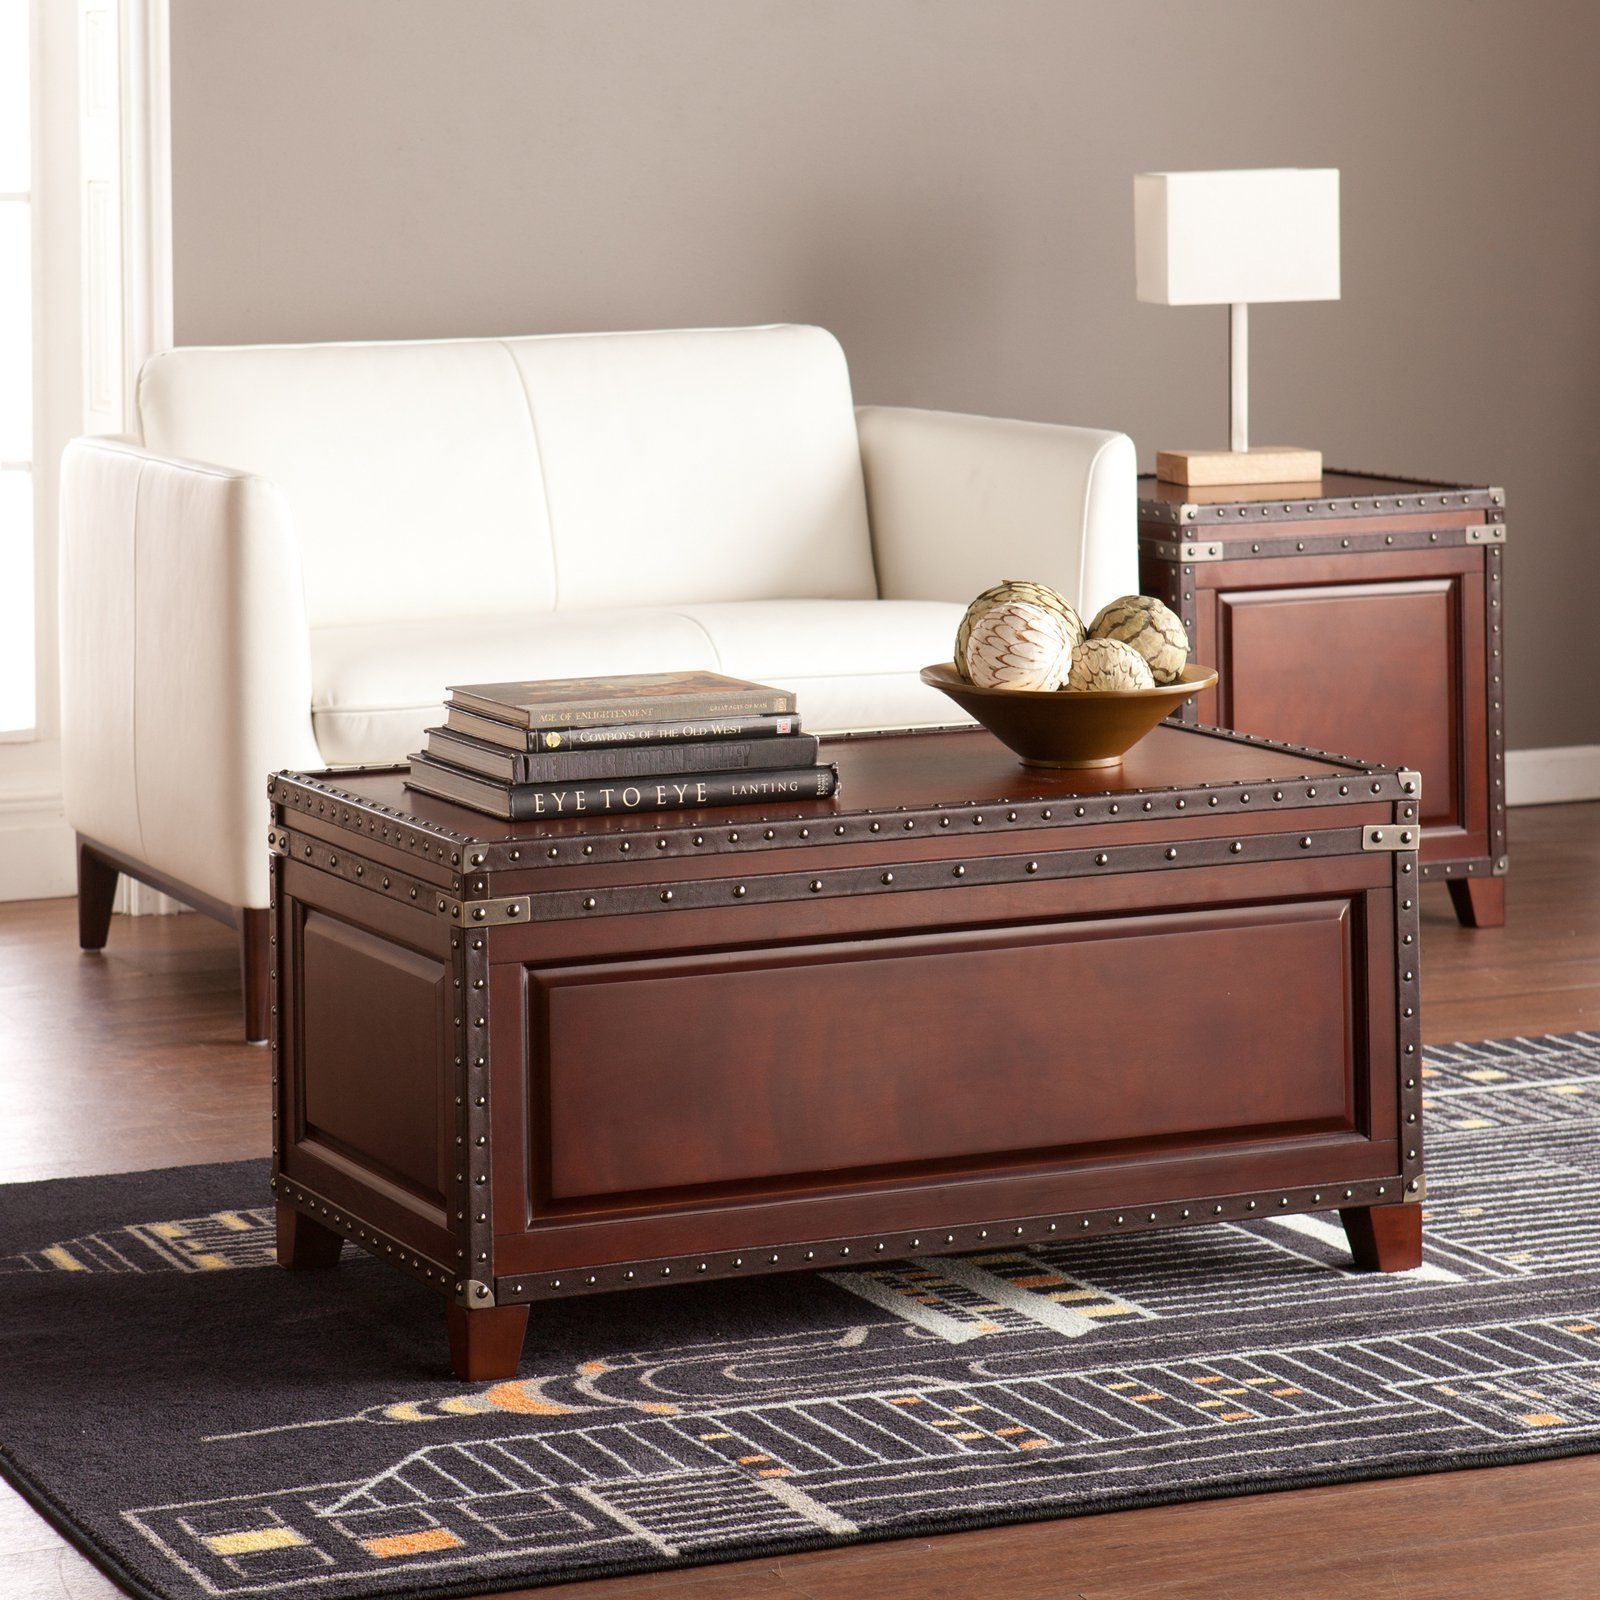 Southern Enterprises Amherst Trunk Coffee Table | From Hayneedle Within Southern Enterprises Larksmill Coffee Tables (View 3 of 15)